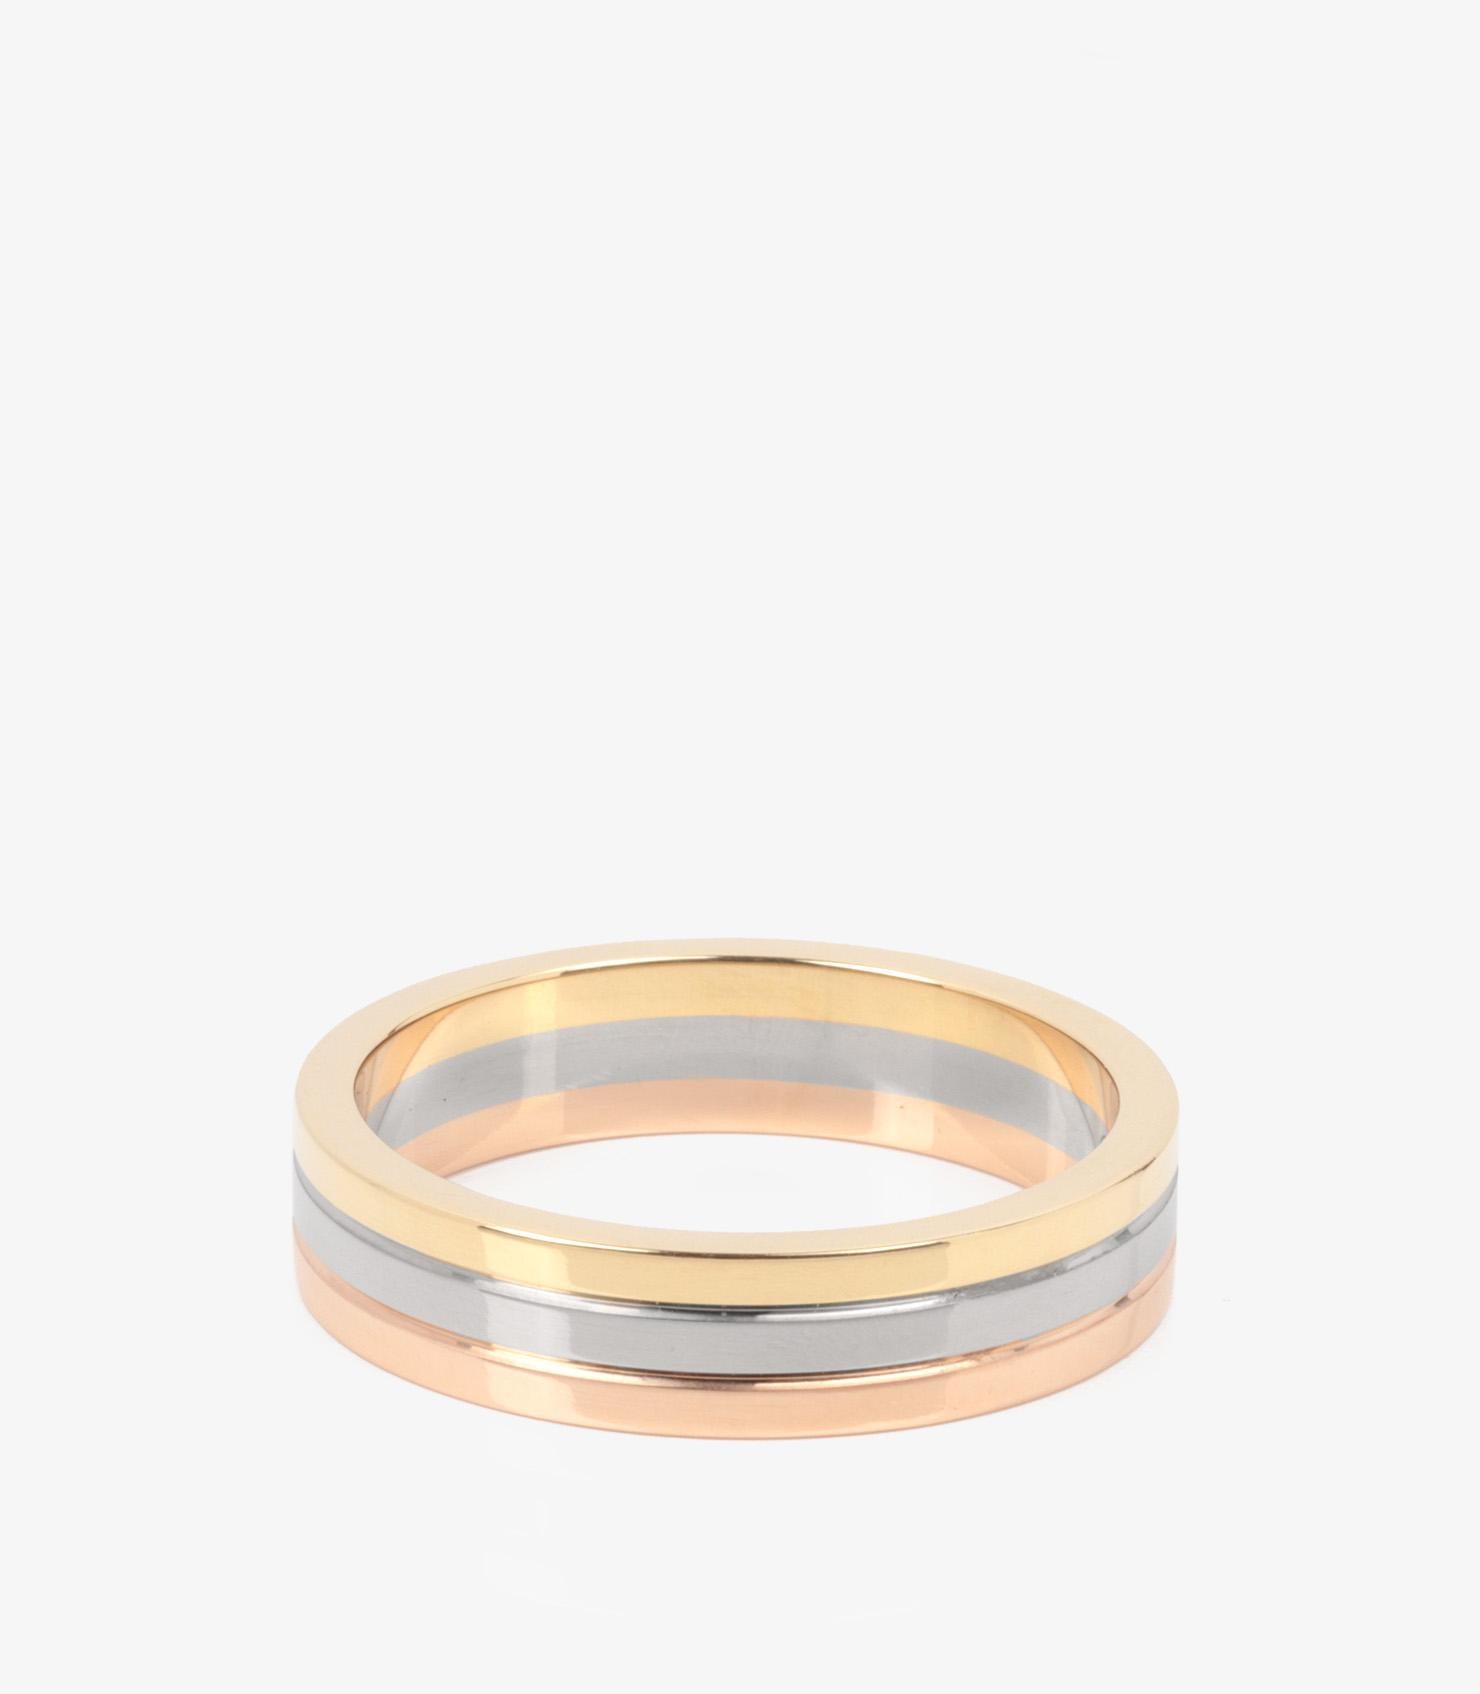 Cartier 18ct White Gold, Yellow Gold And Rose Gold Vendôme Louis Cartier Wedding Band Ring

Brand- Cartier
Model- Vendôme Wedding Band
Product Type- Ring
Serial Number- UF****
Age- Circa 2023
Accompanied By- Cartier Box, Certificate
Material(s)-